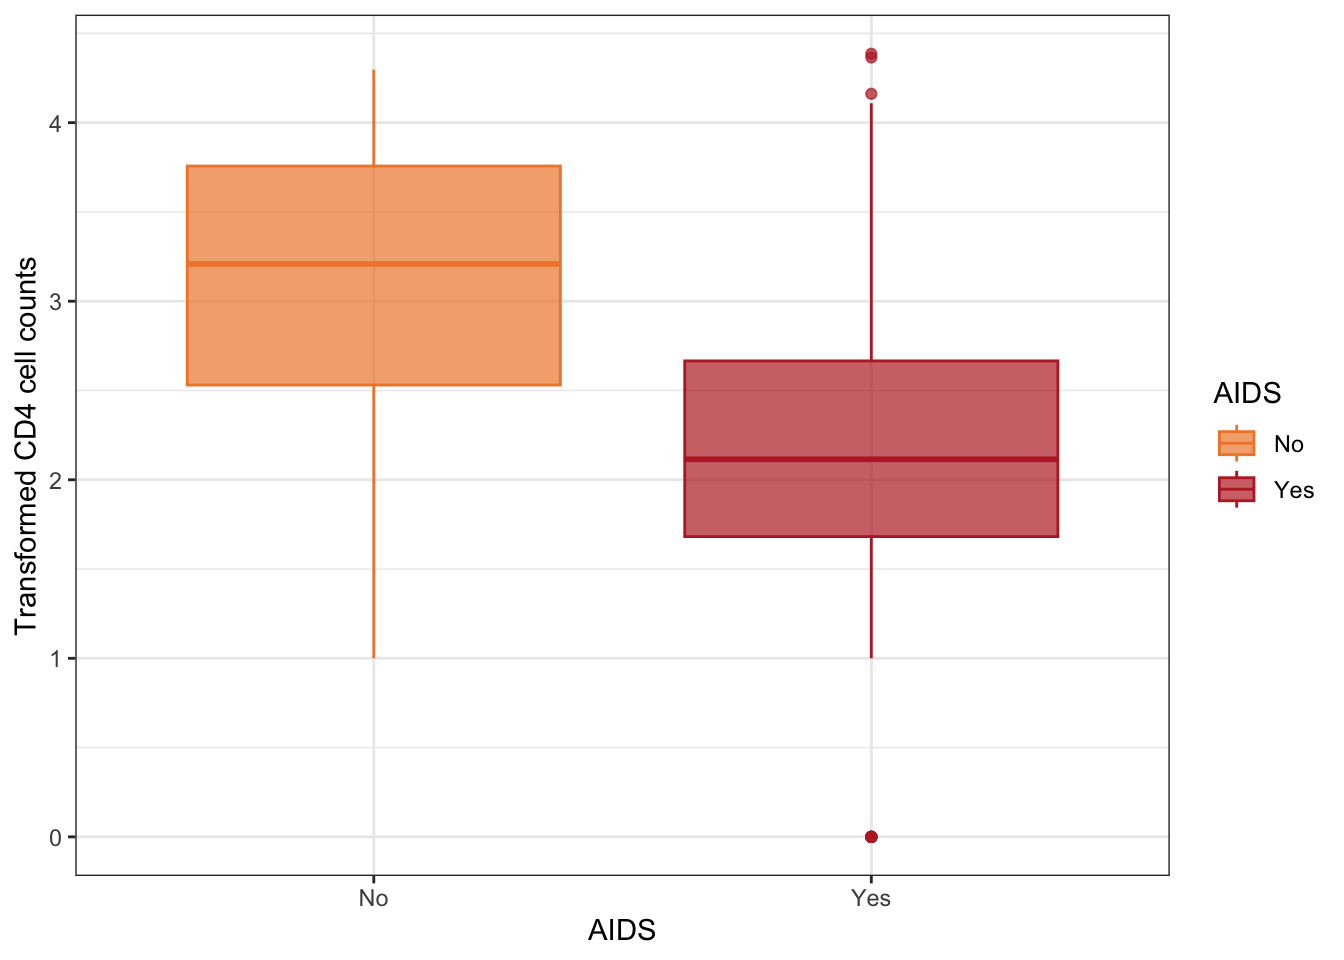 Boxplots of transformed CD4 cell counts according to AIDS status